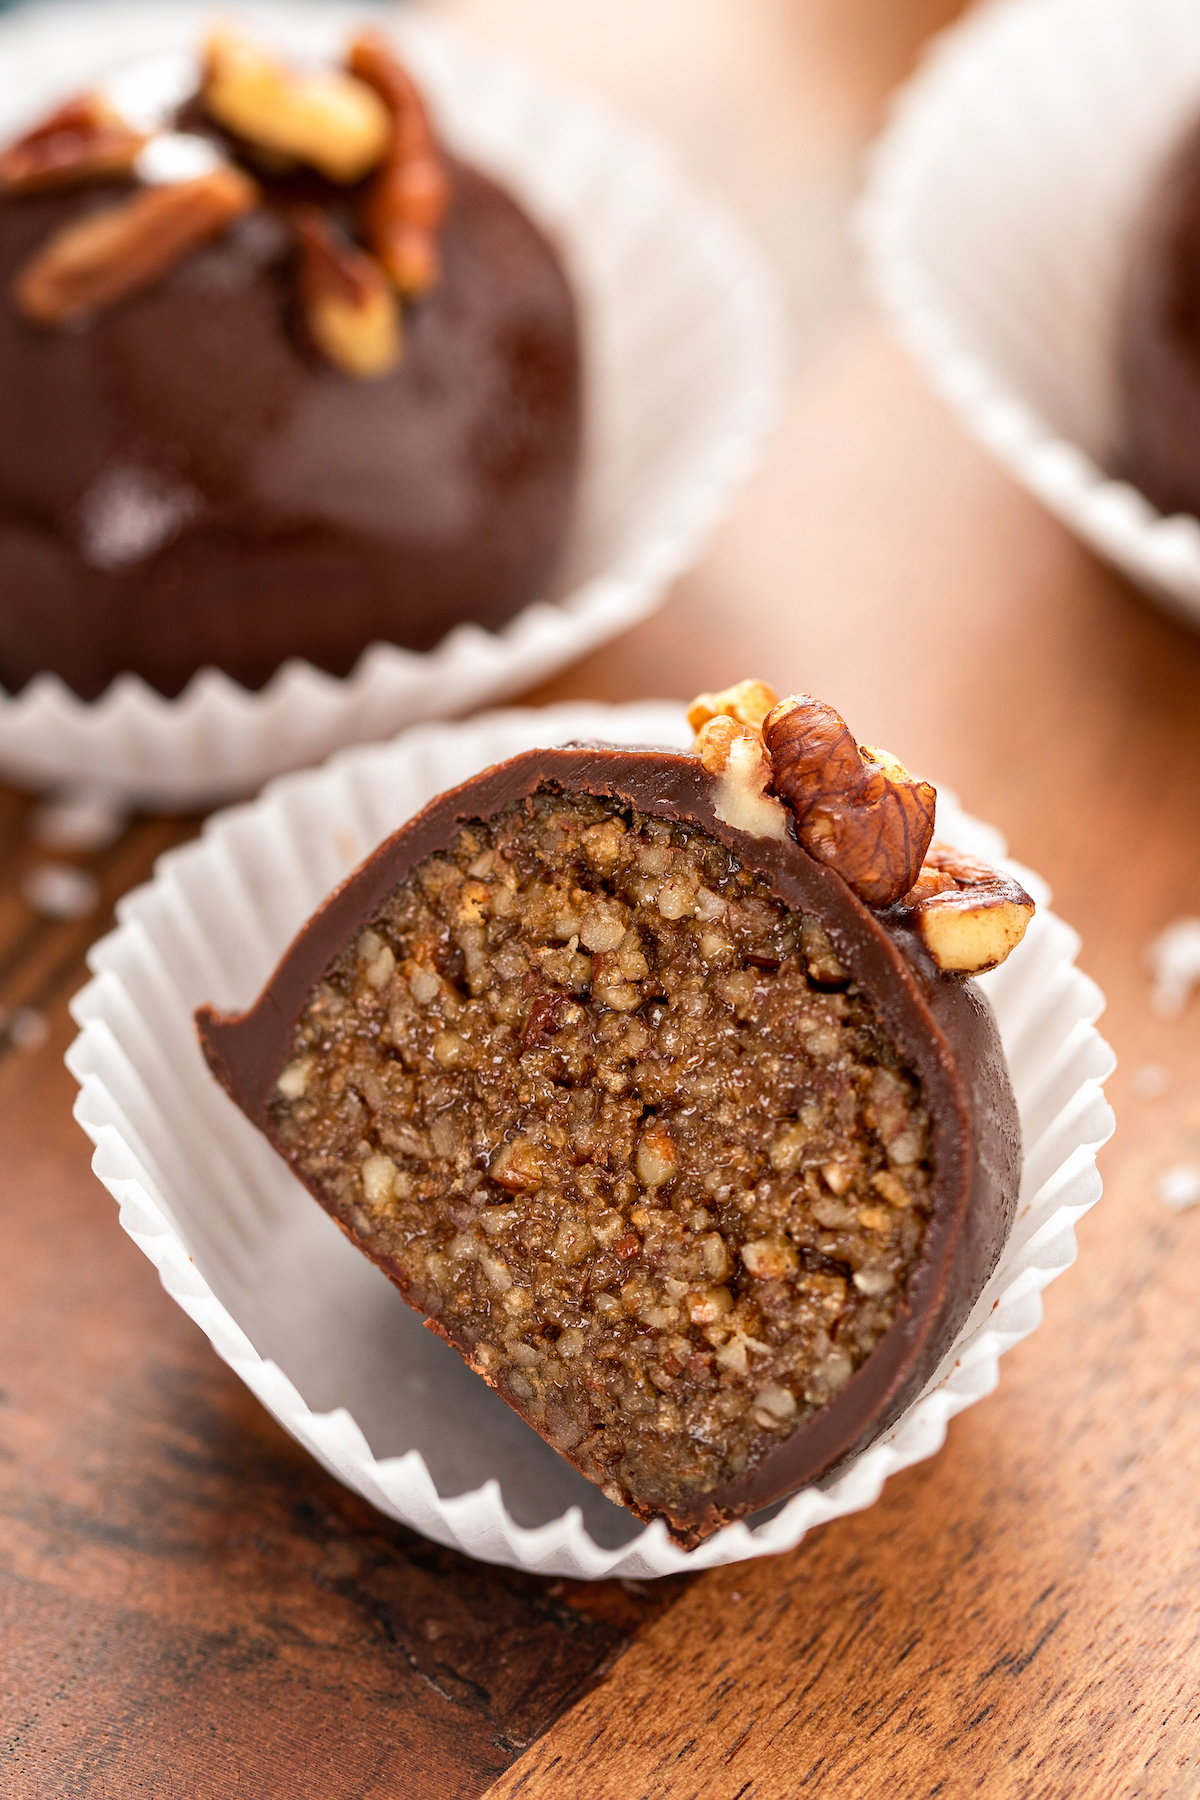 Up close image of a pecan pie truffle sliced in half to show the bourbon pecan pie filling.